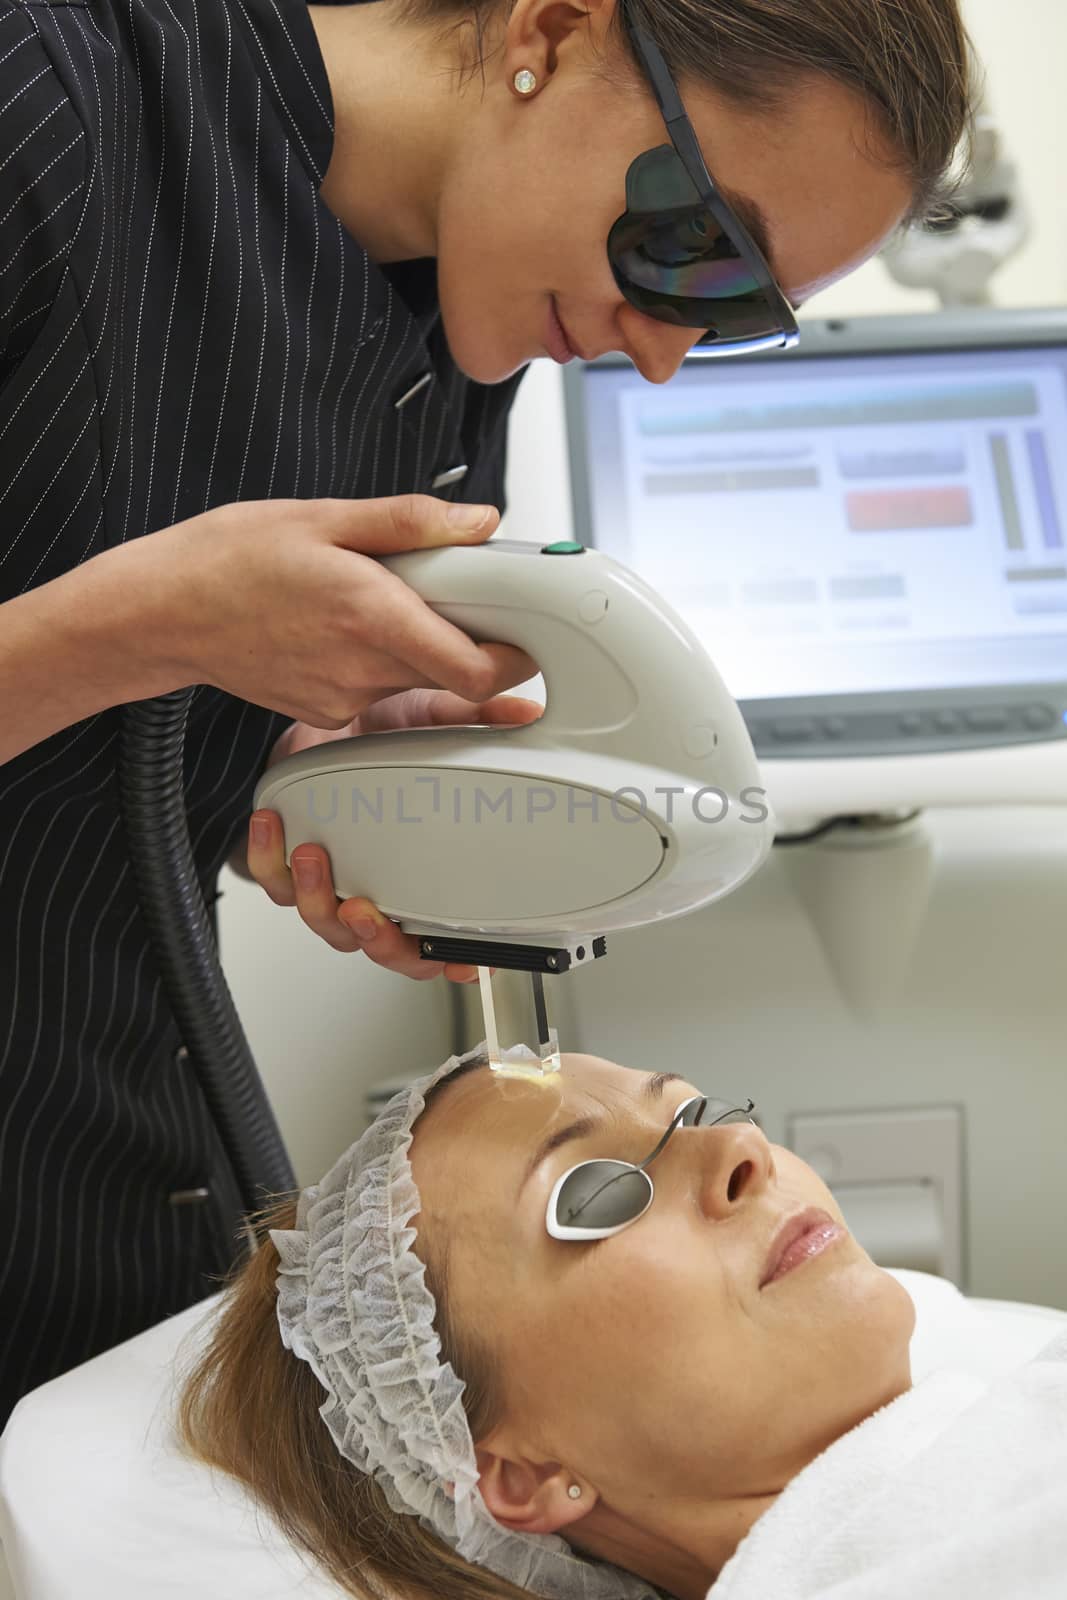 Beautician Carrying Out Fractional Laser Treatment by HighwayStarz